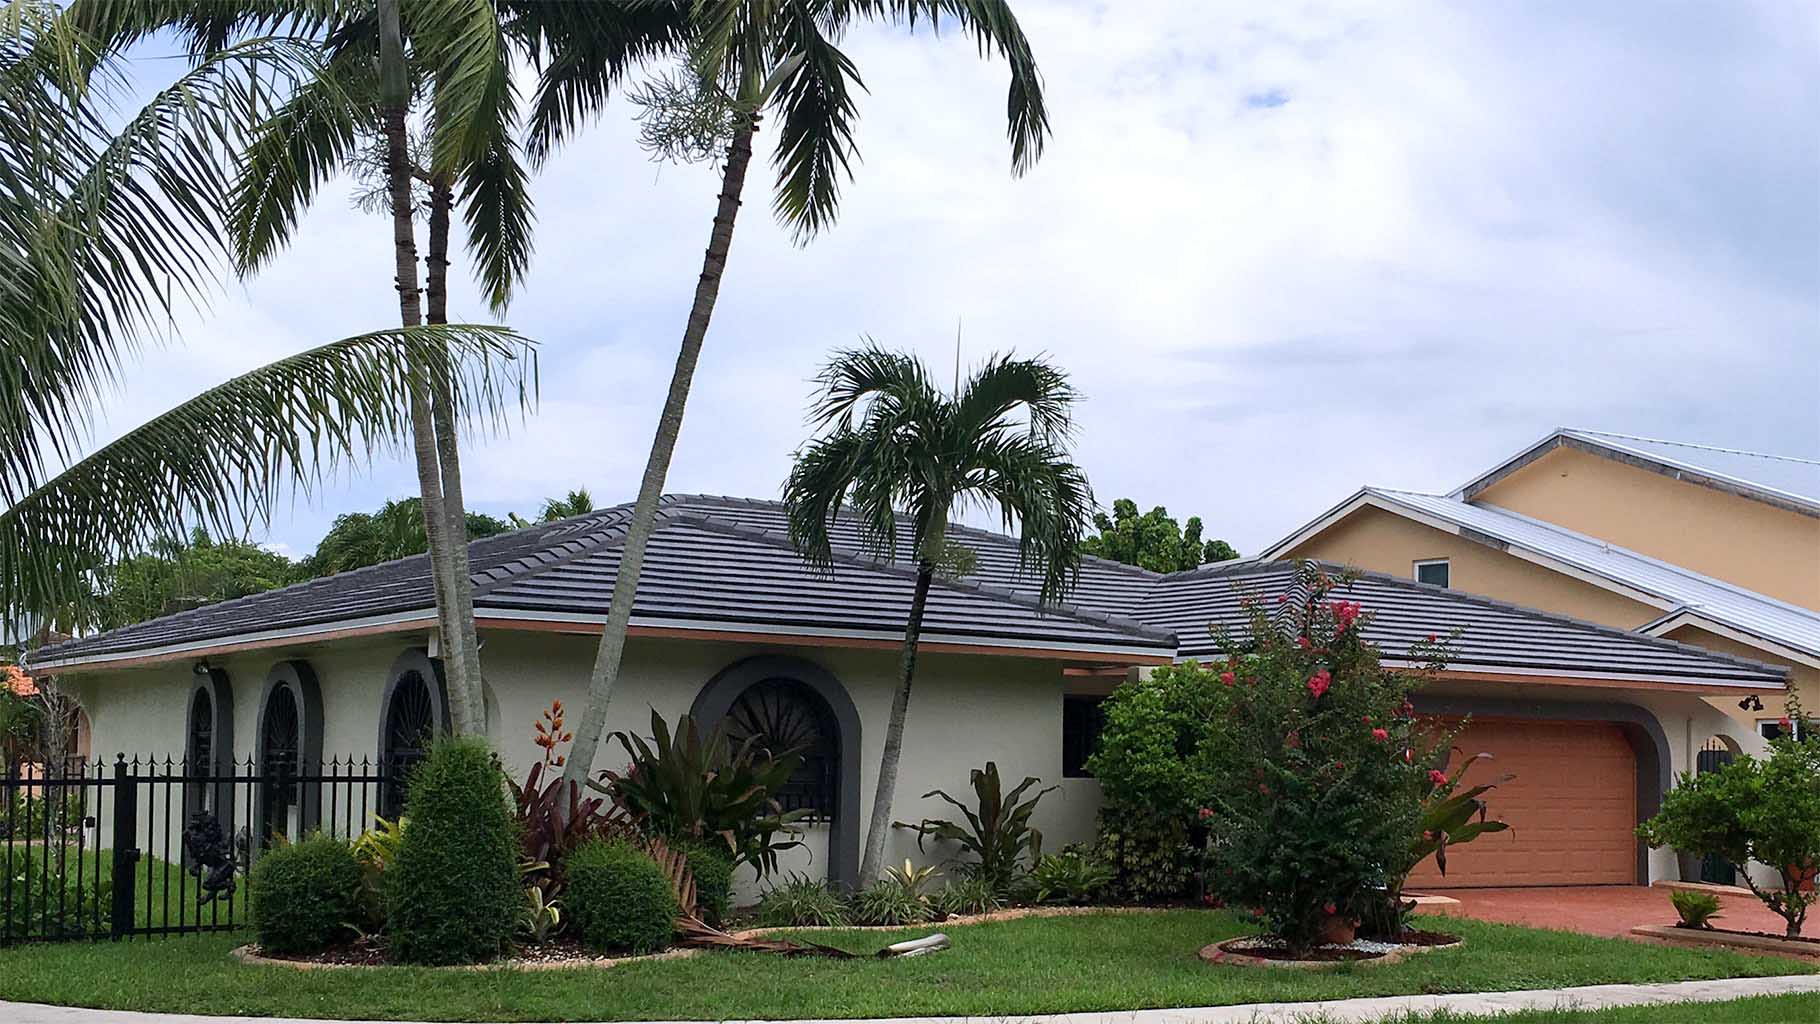 Flat Concrete Roof Tile in Westchester — Miami General Contractor